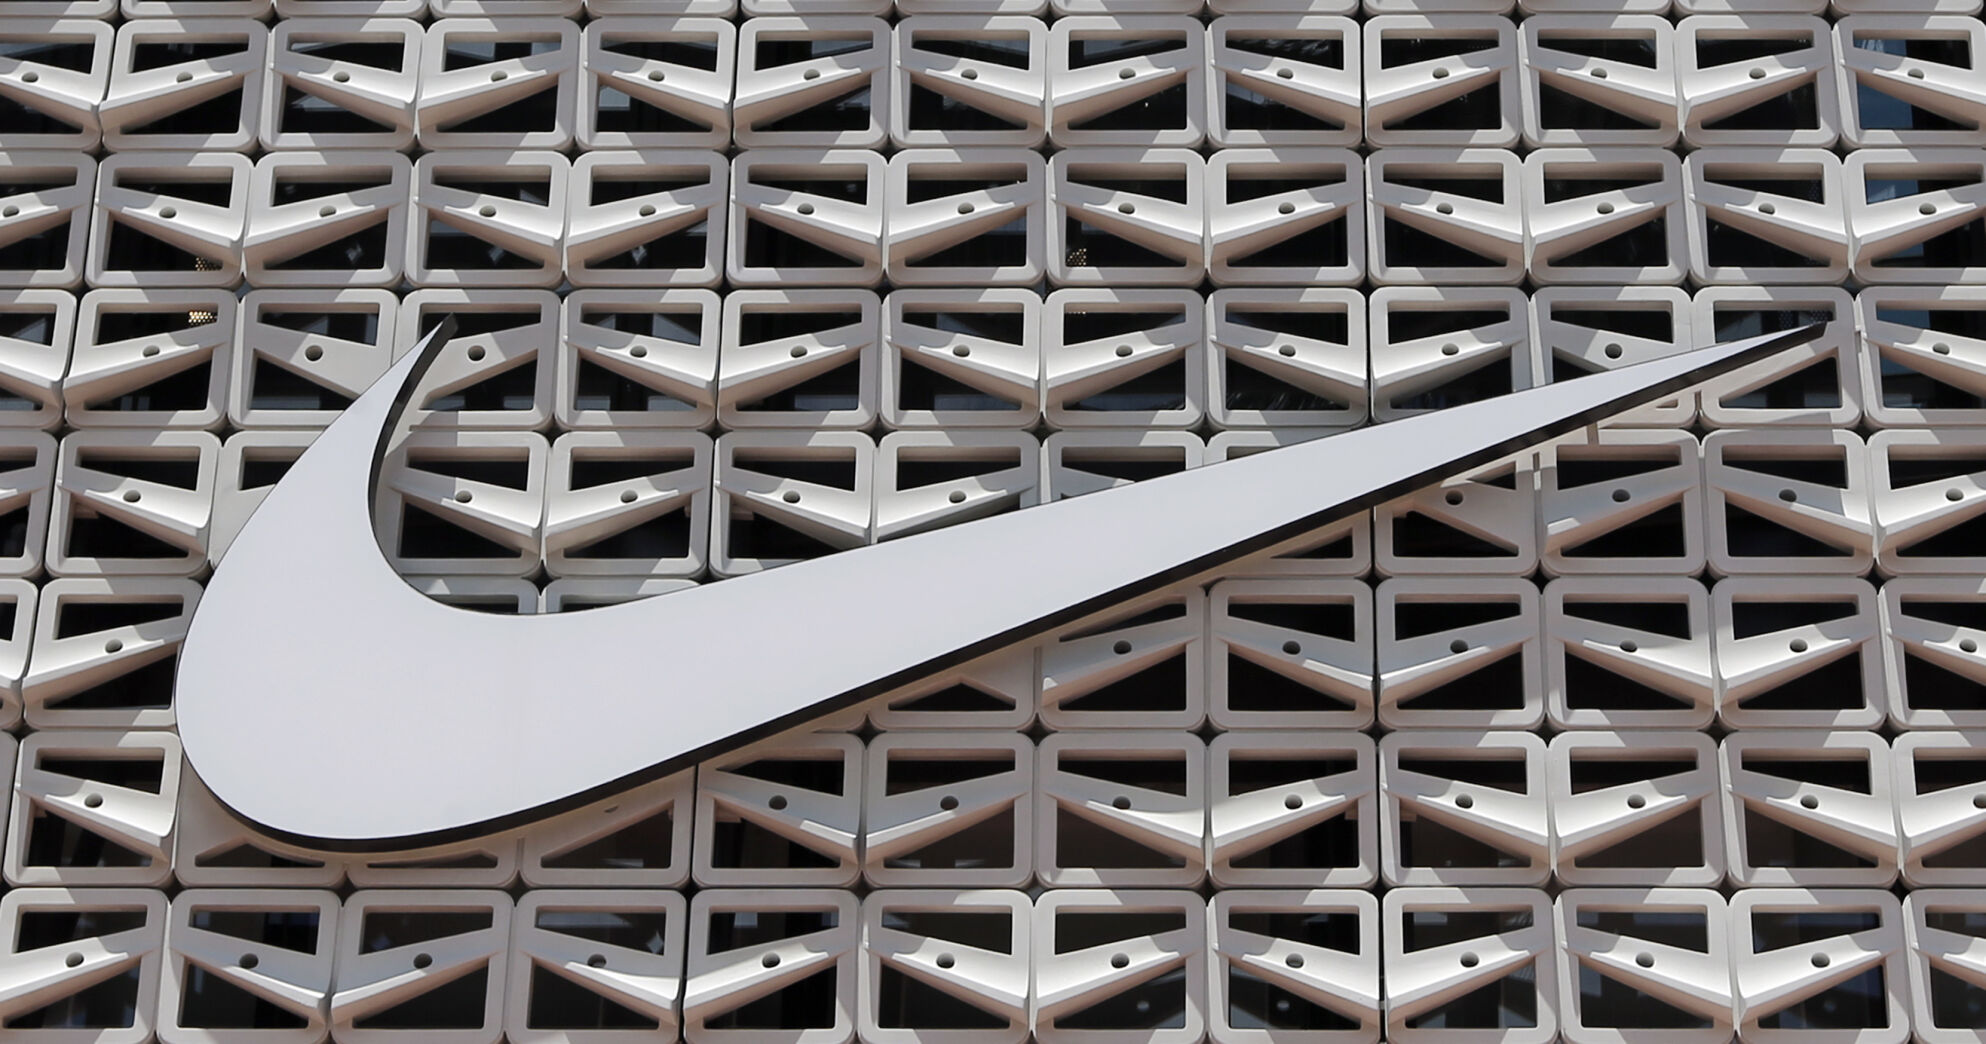 <p>File - The Nike logo is shown on a store in Miami Beach, Fla. on Aug. 8, 2017. An agreement to weed out global tax havens and force multinational corporations, among them Apple and Nike, to pay a minimum tax has been weakened by loopholes and will raise only a fraction of the revenue that was envisioned, a tax watchdog backed by the European Union has warned. (AP Photo/Alan Diaz, File)</p>   PHOTO CREDIT: Alan Diaz 